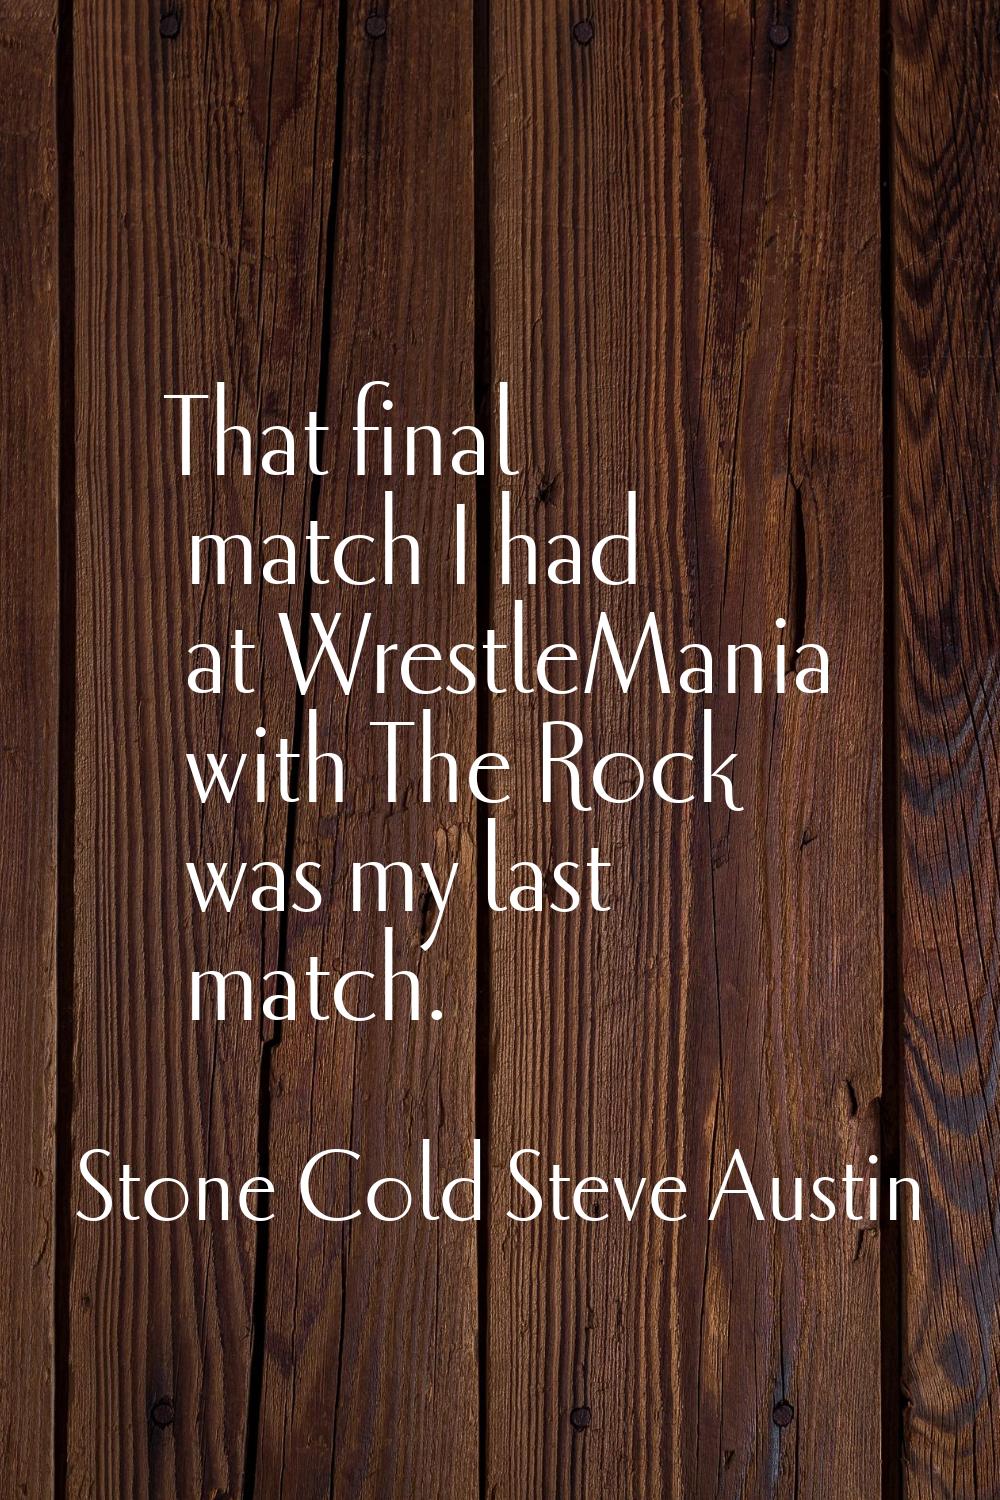 That final match I had at WrestleMania with The Rock was my last match.